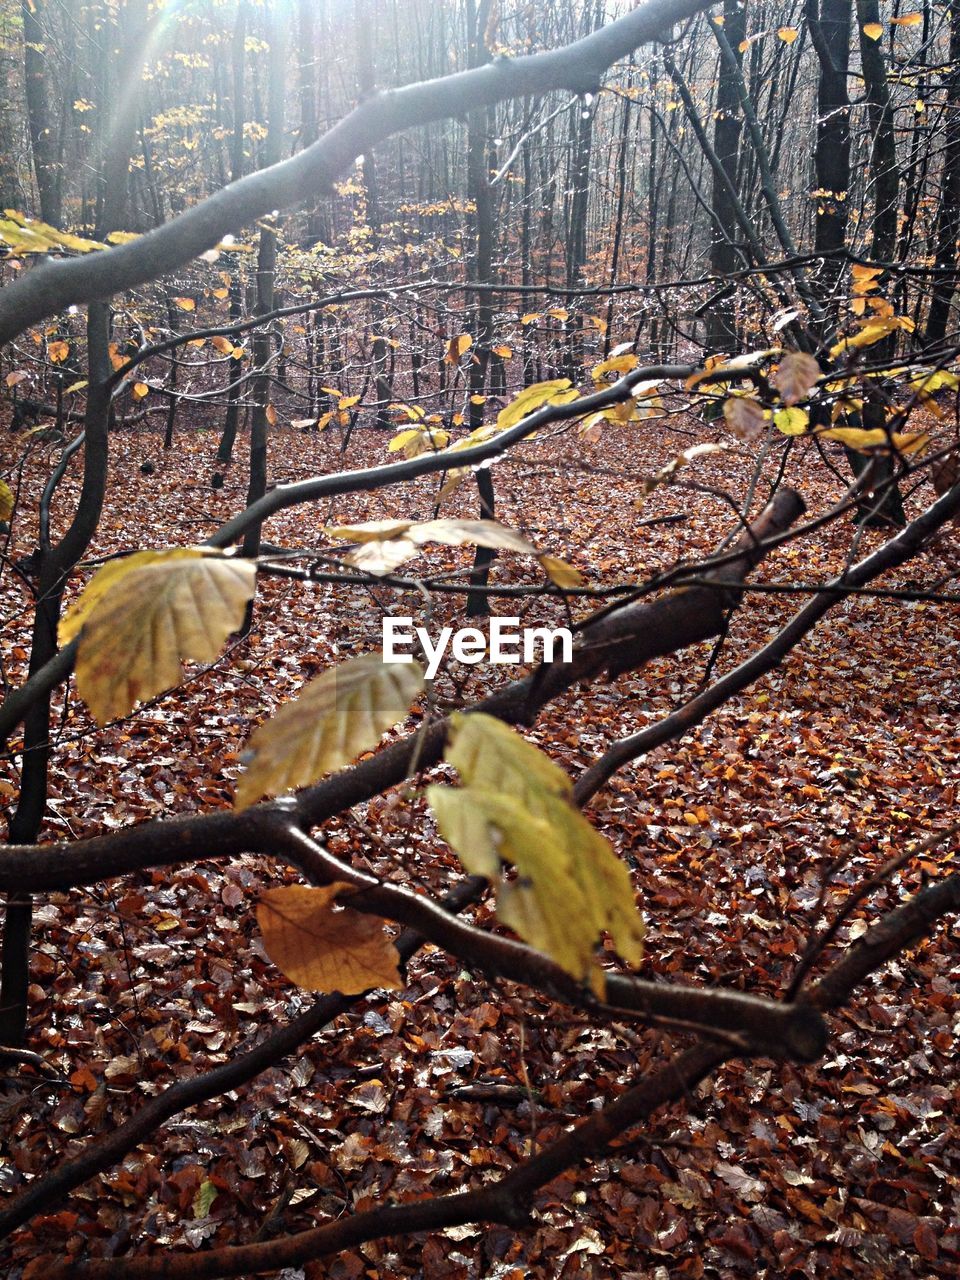 Trees and fallen leaves in forest seen through branches during autumn